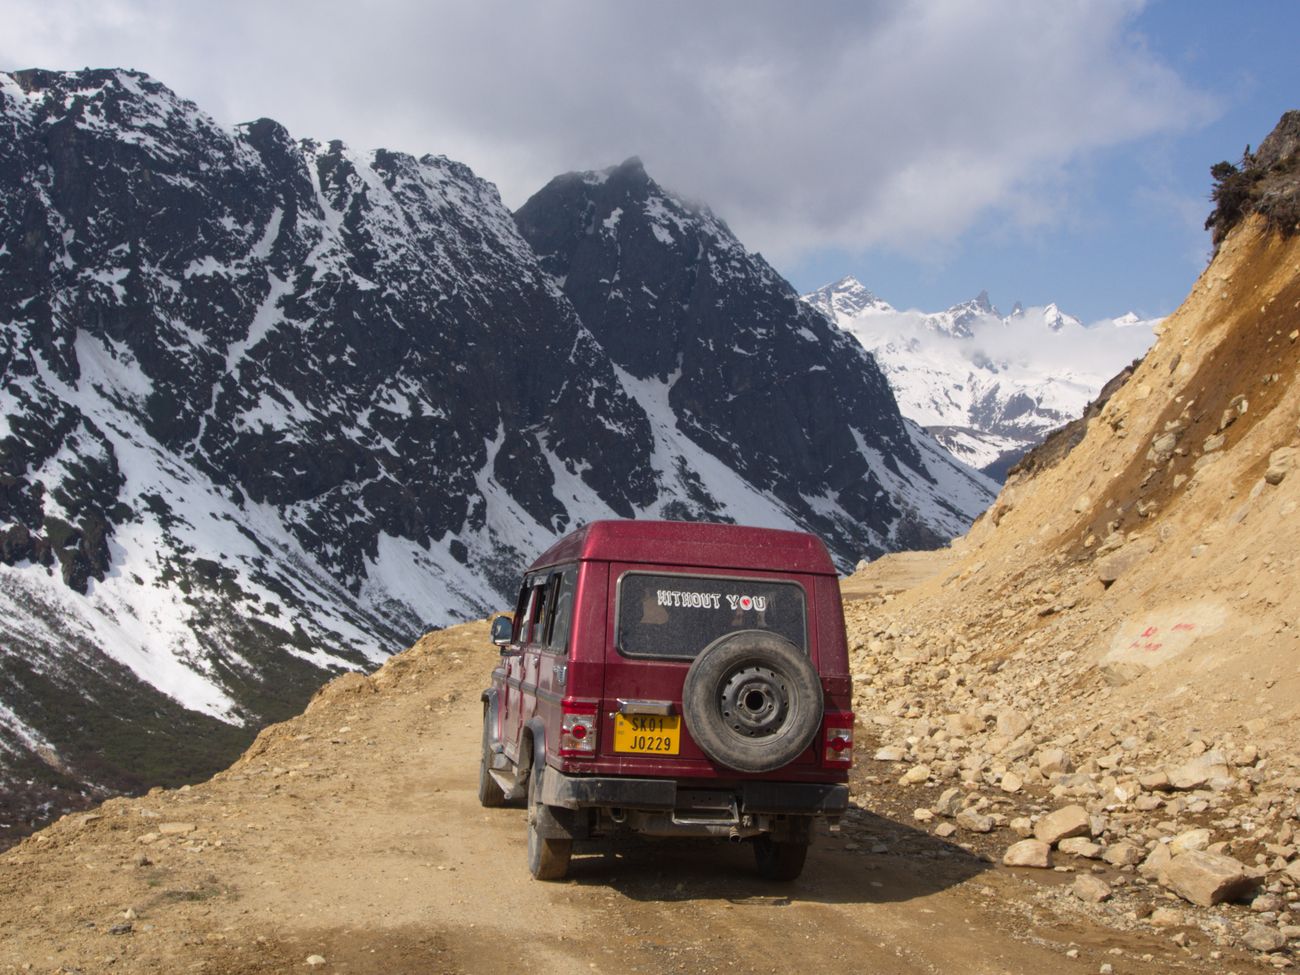 In the uphill drive through the Yumthang Valley, the indie jeep is the preferred mode of transportation as it has the right torque to climb and is stable on the curves due to its weight